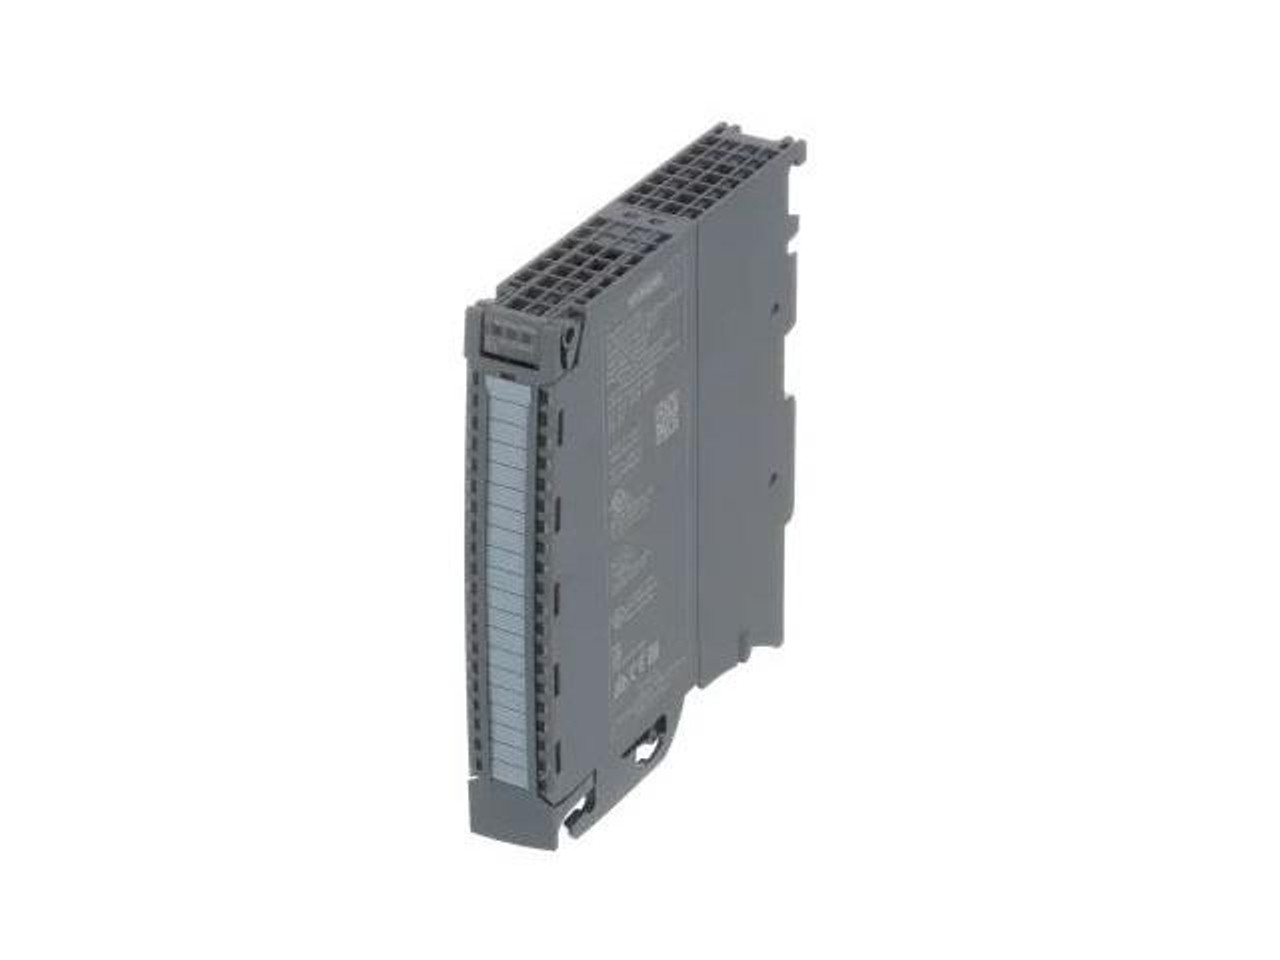 6ES75231BL000AA0 Siemens SIMATIC S7-1500 16DI + 16DO 24V DC/0.5A BA Basic Including Push-in Connector Module